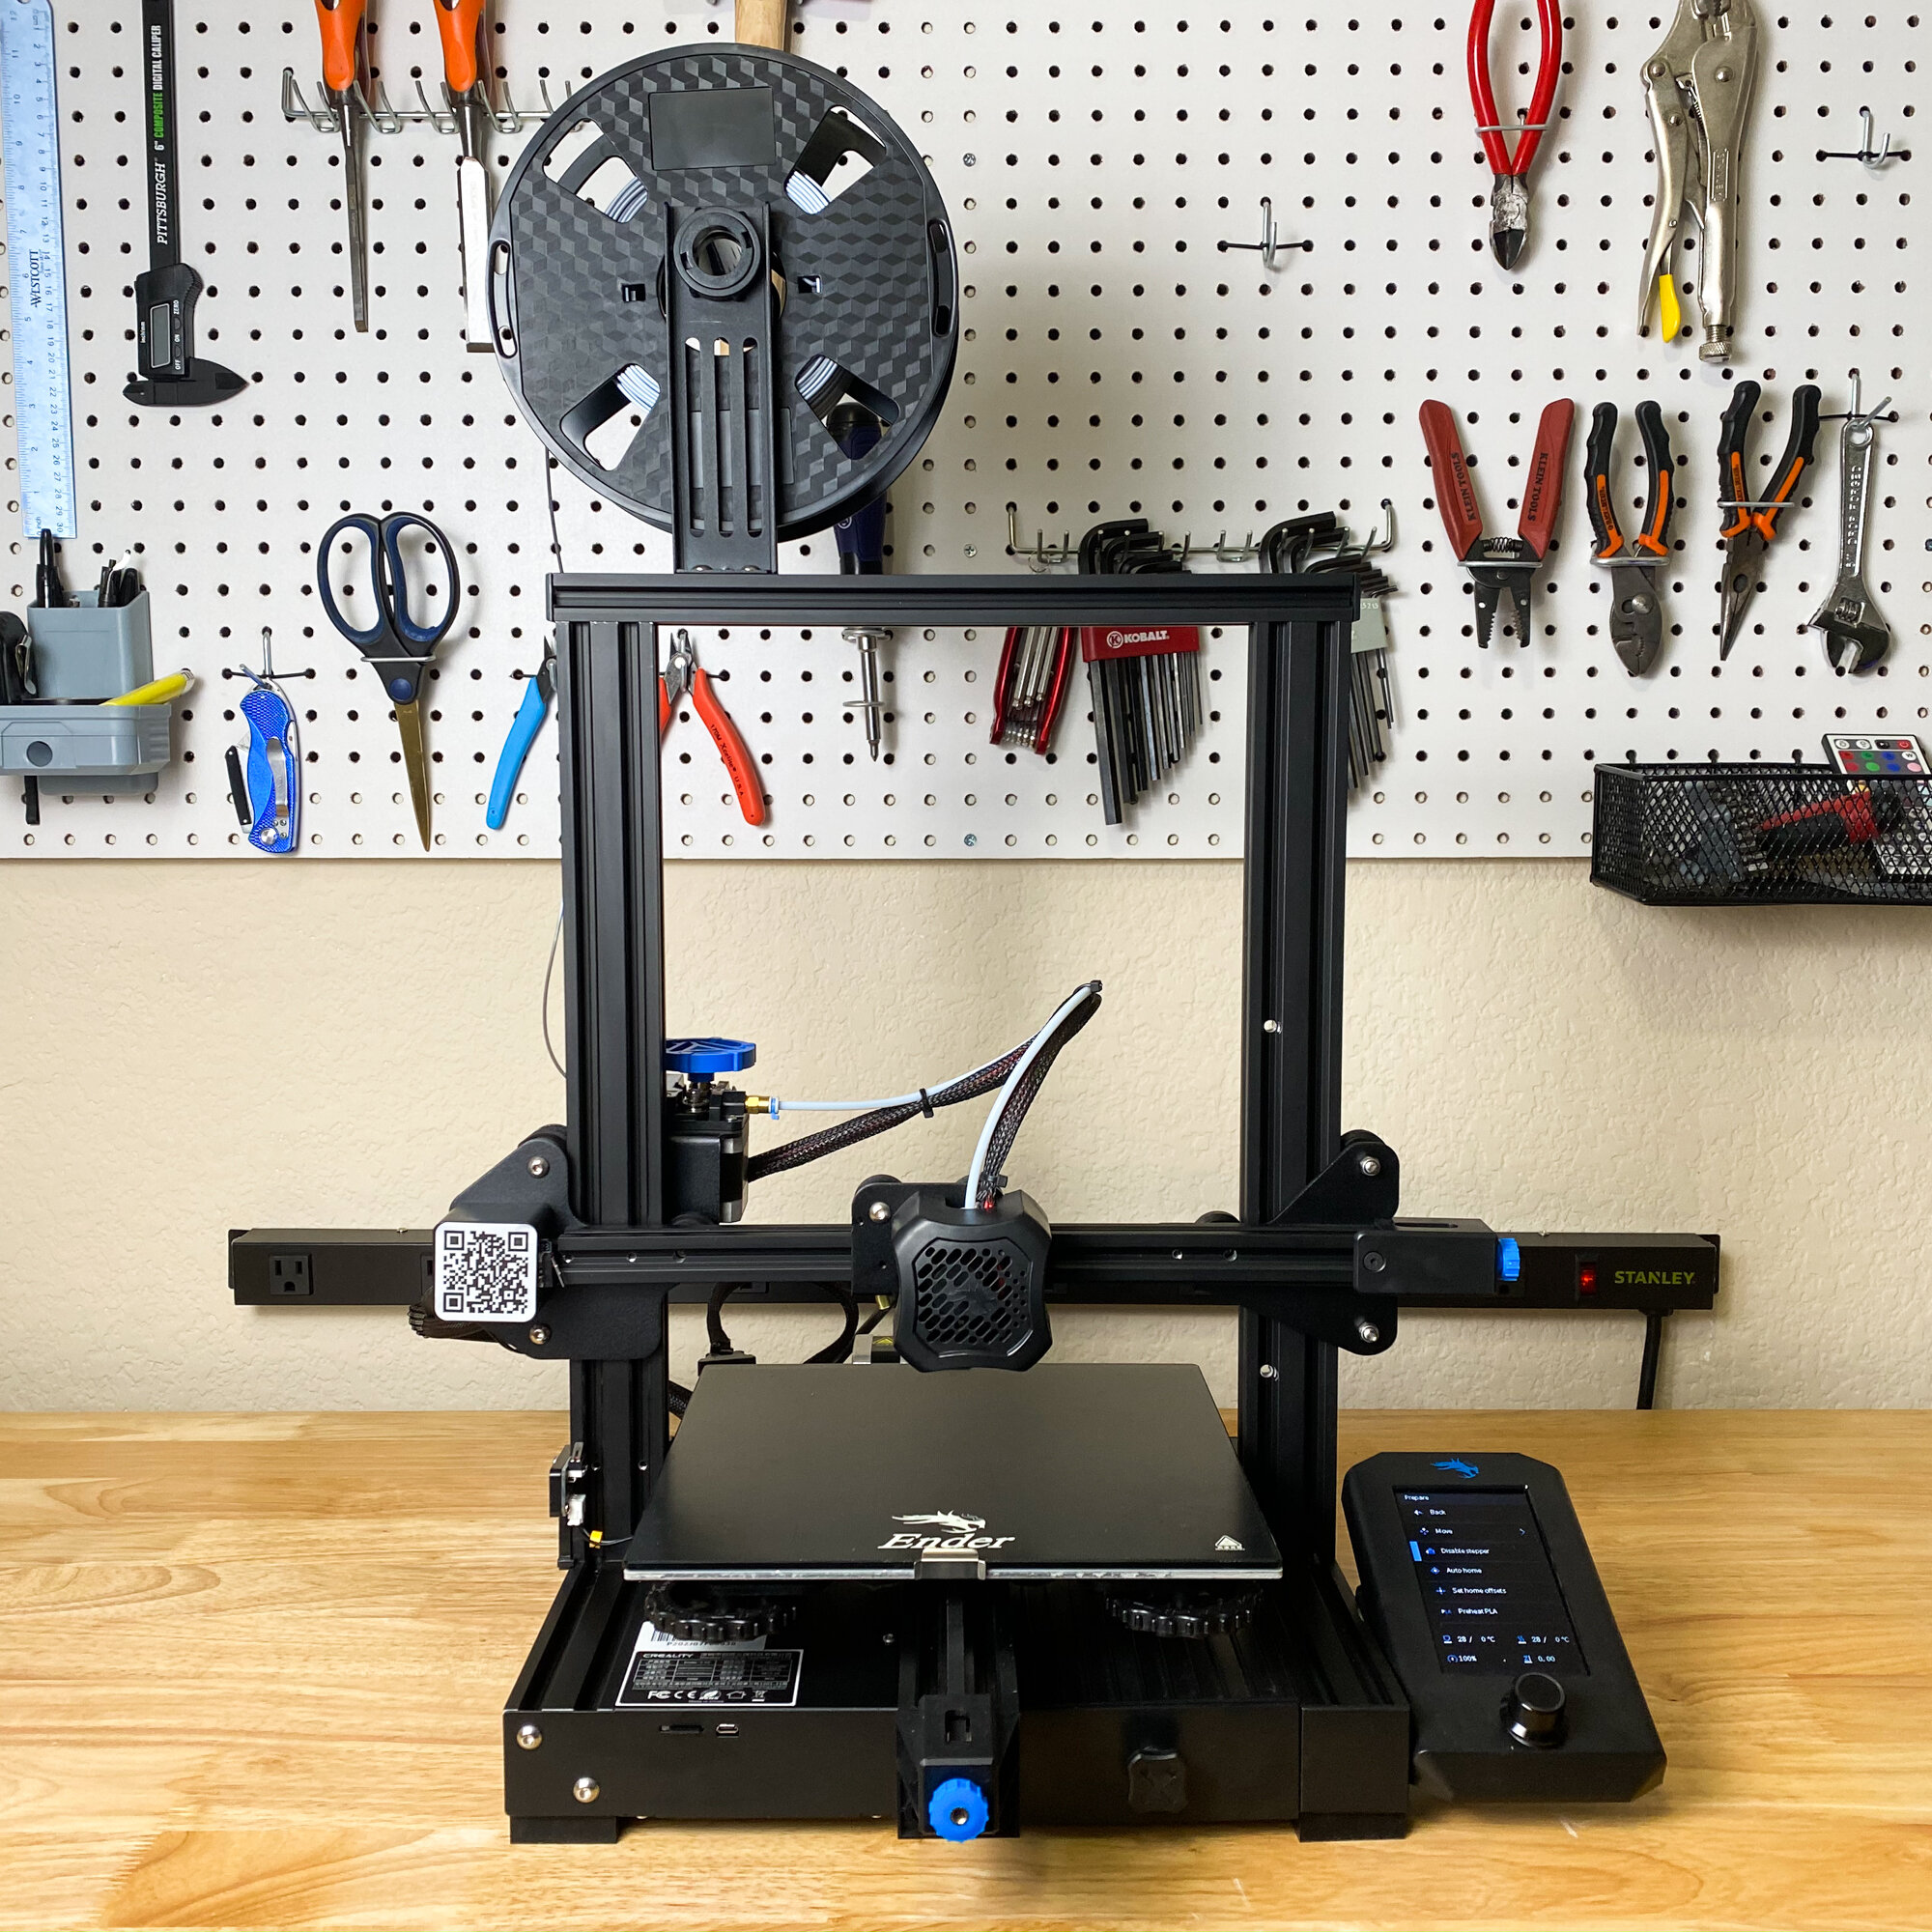 The Best Creality 3D Printers of 2021 — Creality Experts